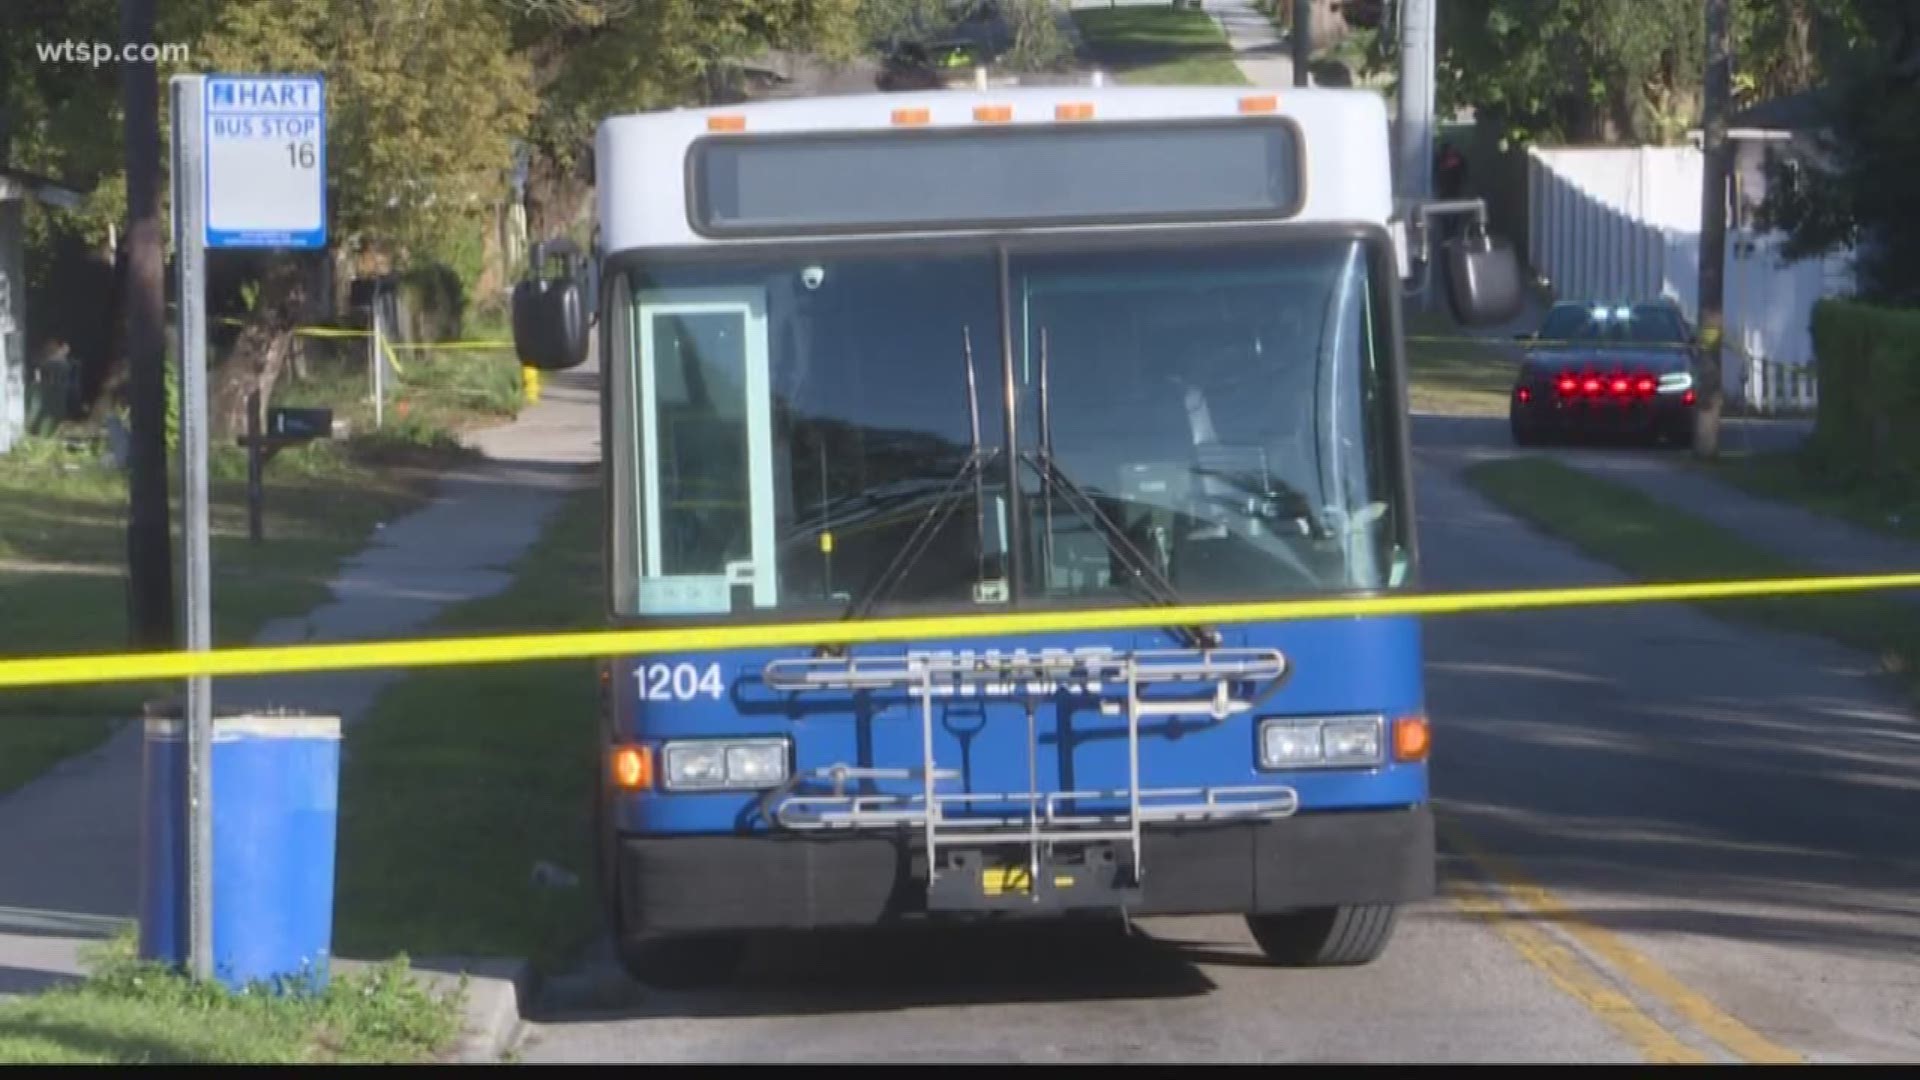 A HART bus driver was cut several times in the leg over an argument about the bus fare in the city's Sulphur Springs neighborhood, Tampa police say.